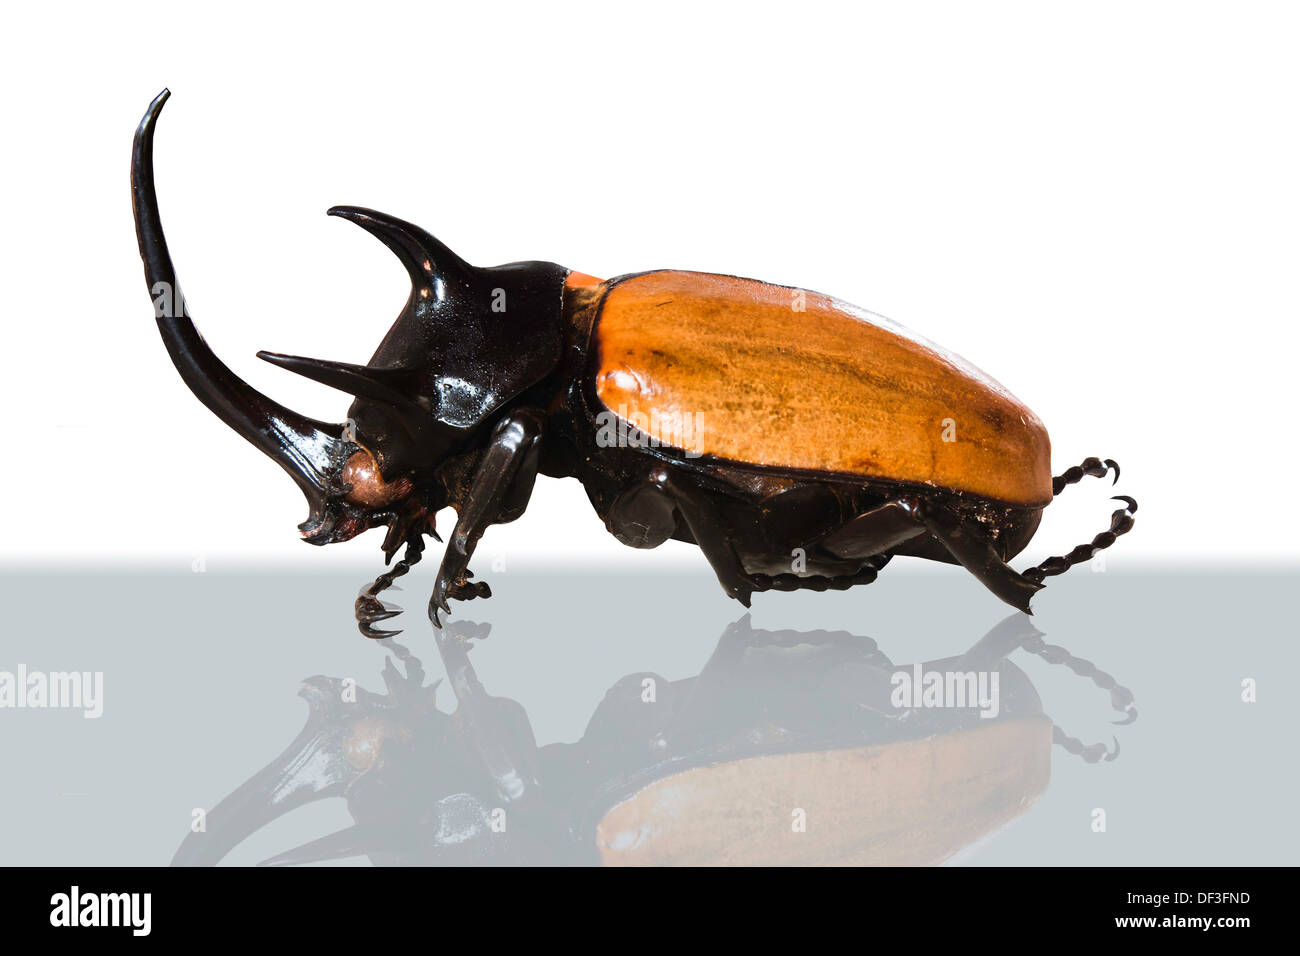 animal, antenna, backgrounds, beauty, beetle, big, bite, black, brown, bug, case, claw, close, closeup, clotures, color, danger Stock Photo